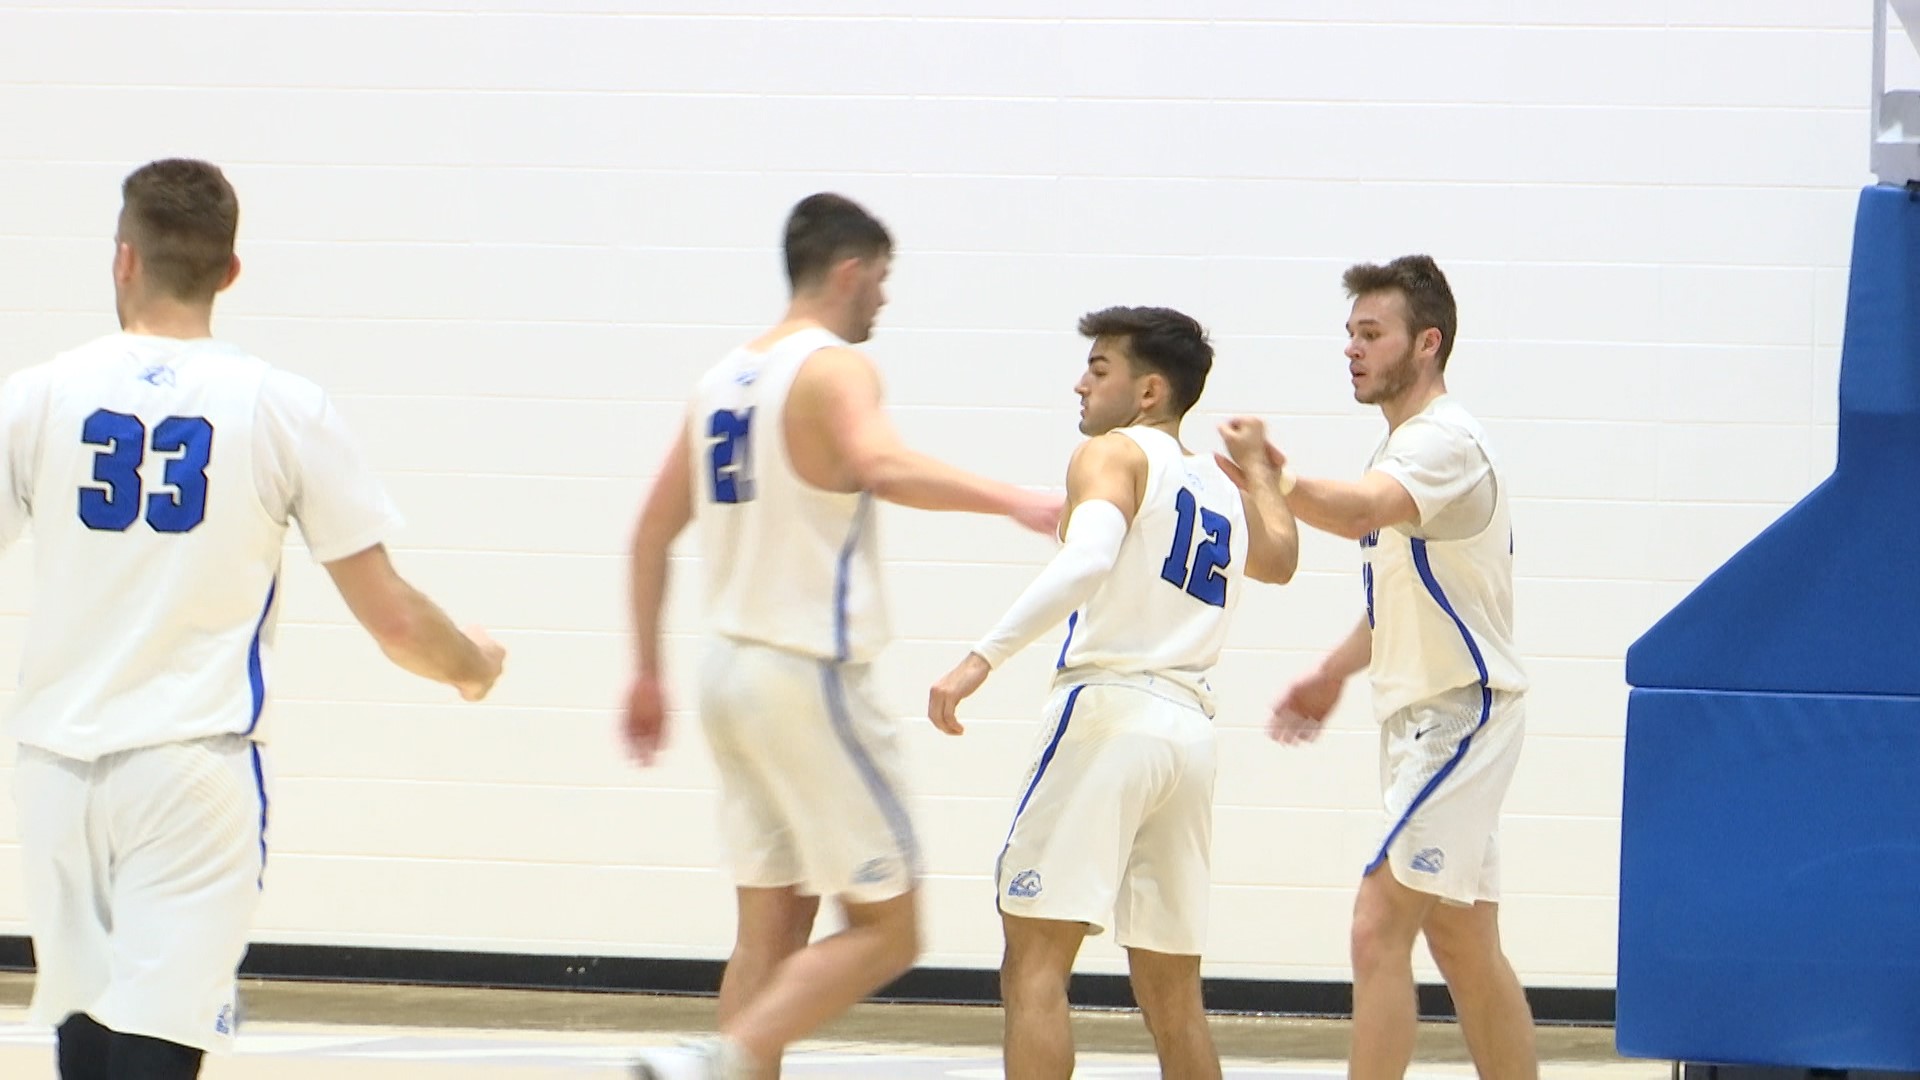 The UAH men's basketball team picked up a thrilling double overtime victory over visiting Delta State on Tuesday afternoon, winning 106-102.